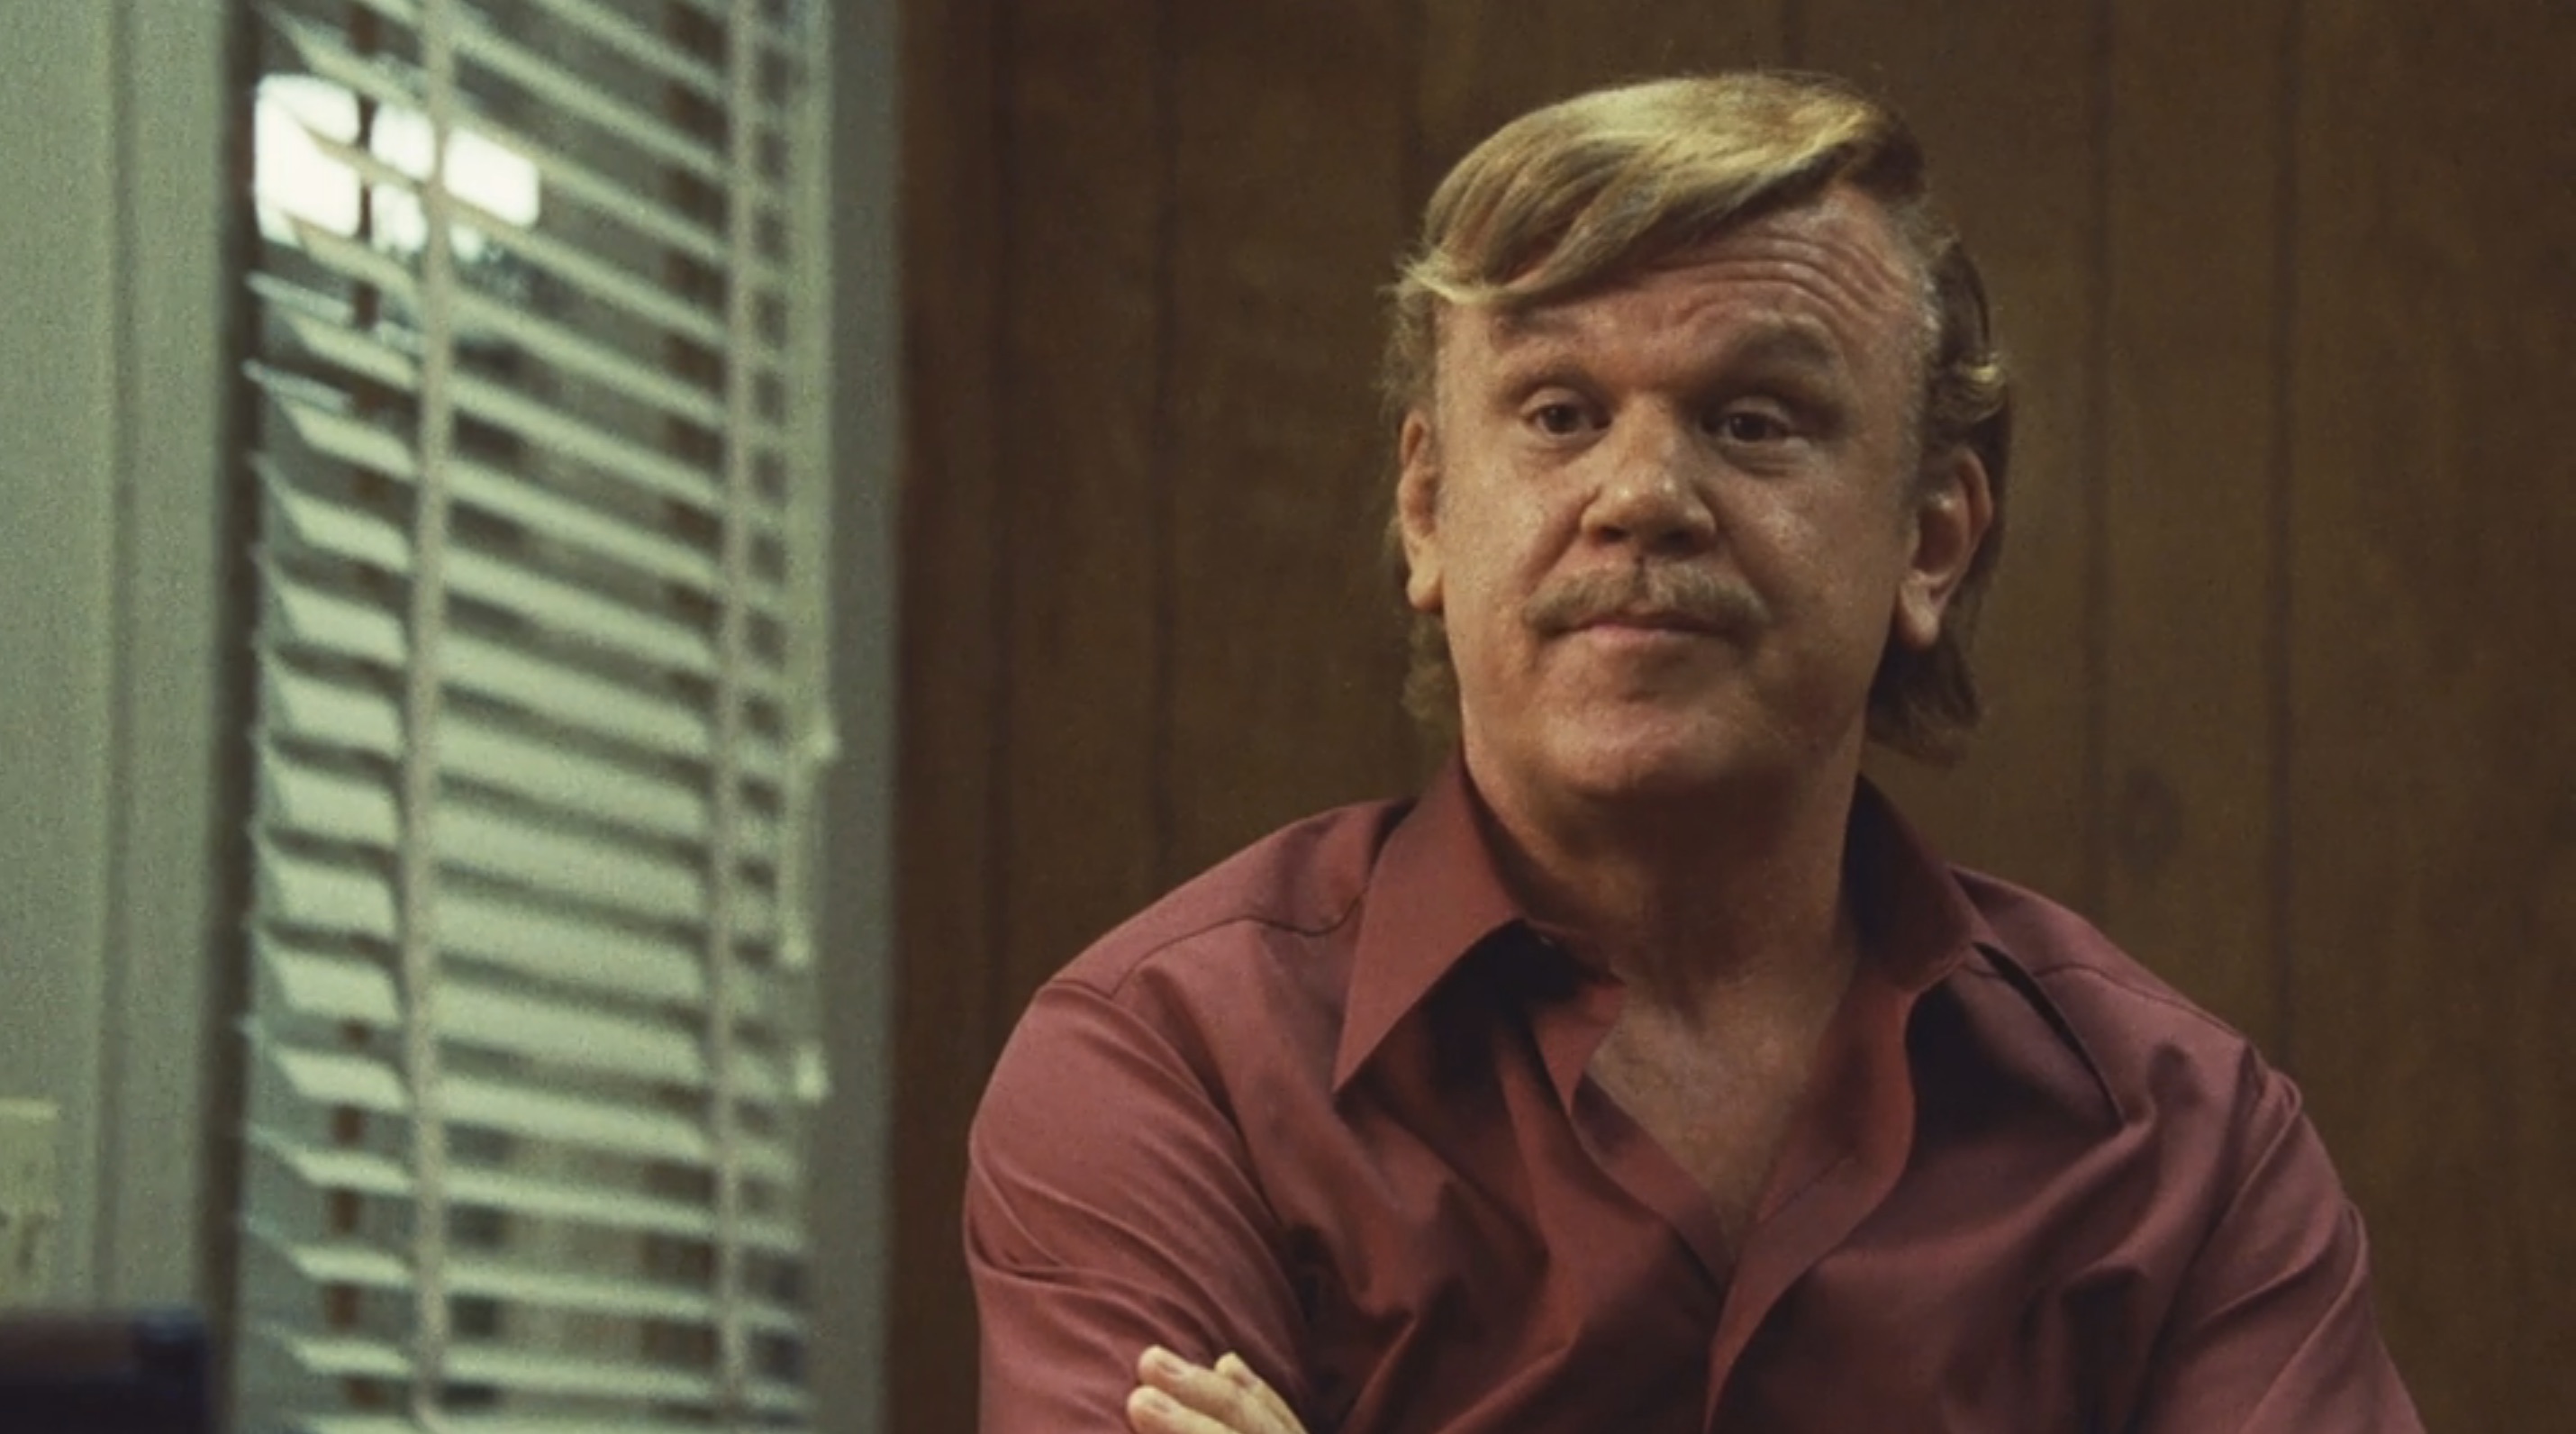 Winning Time Cast on HBO - John C. Reilly as Jerry Buss